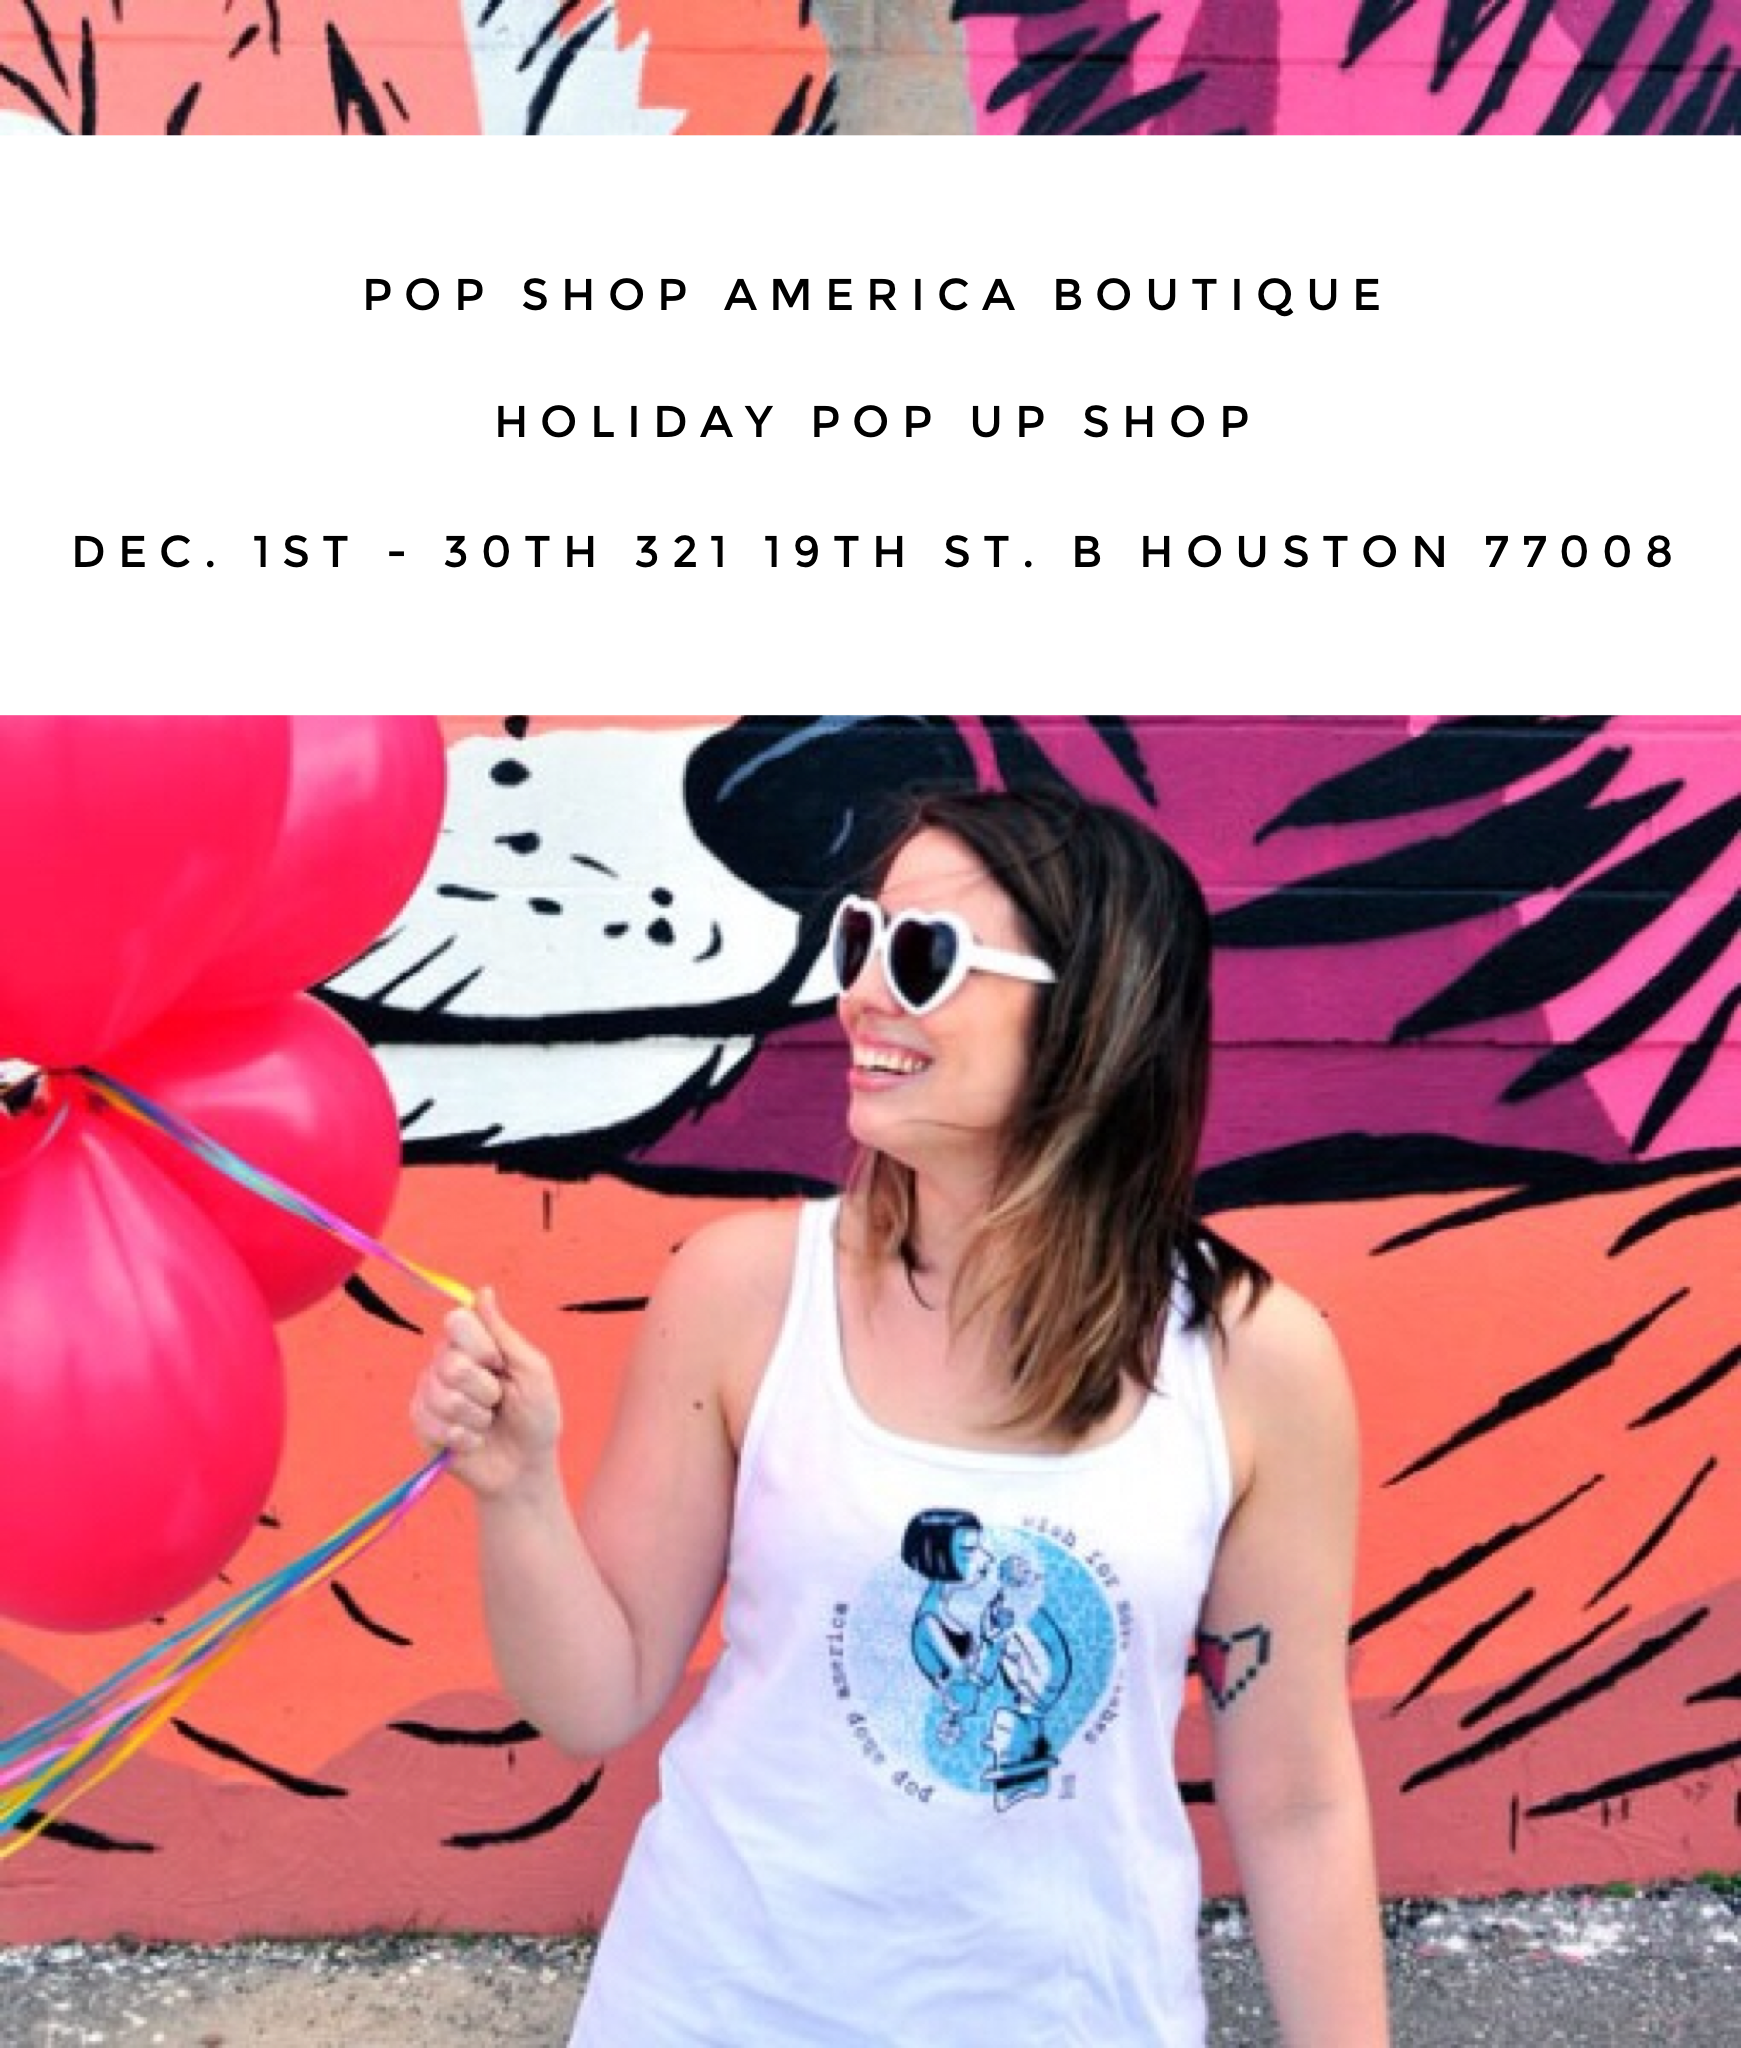 pop-shop-america-pop-up-boutique-19th-st-heights-houston